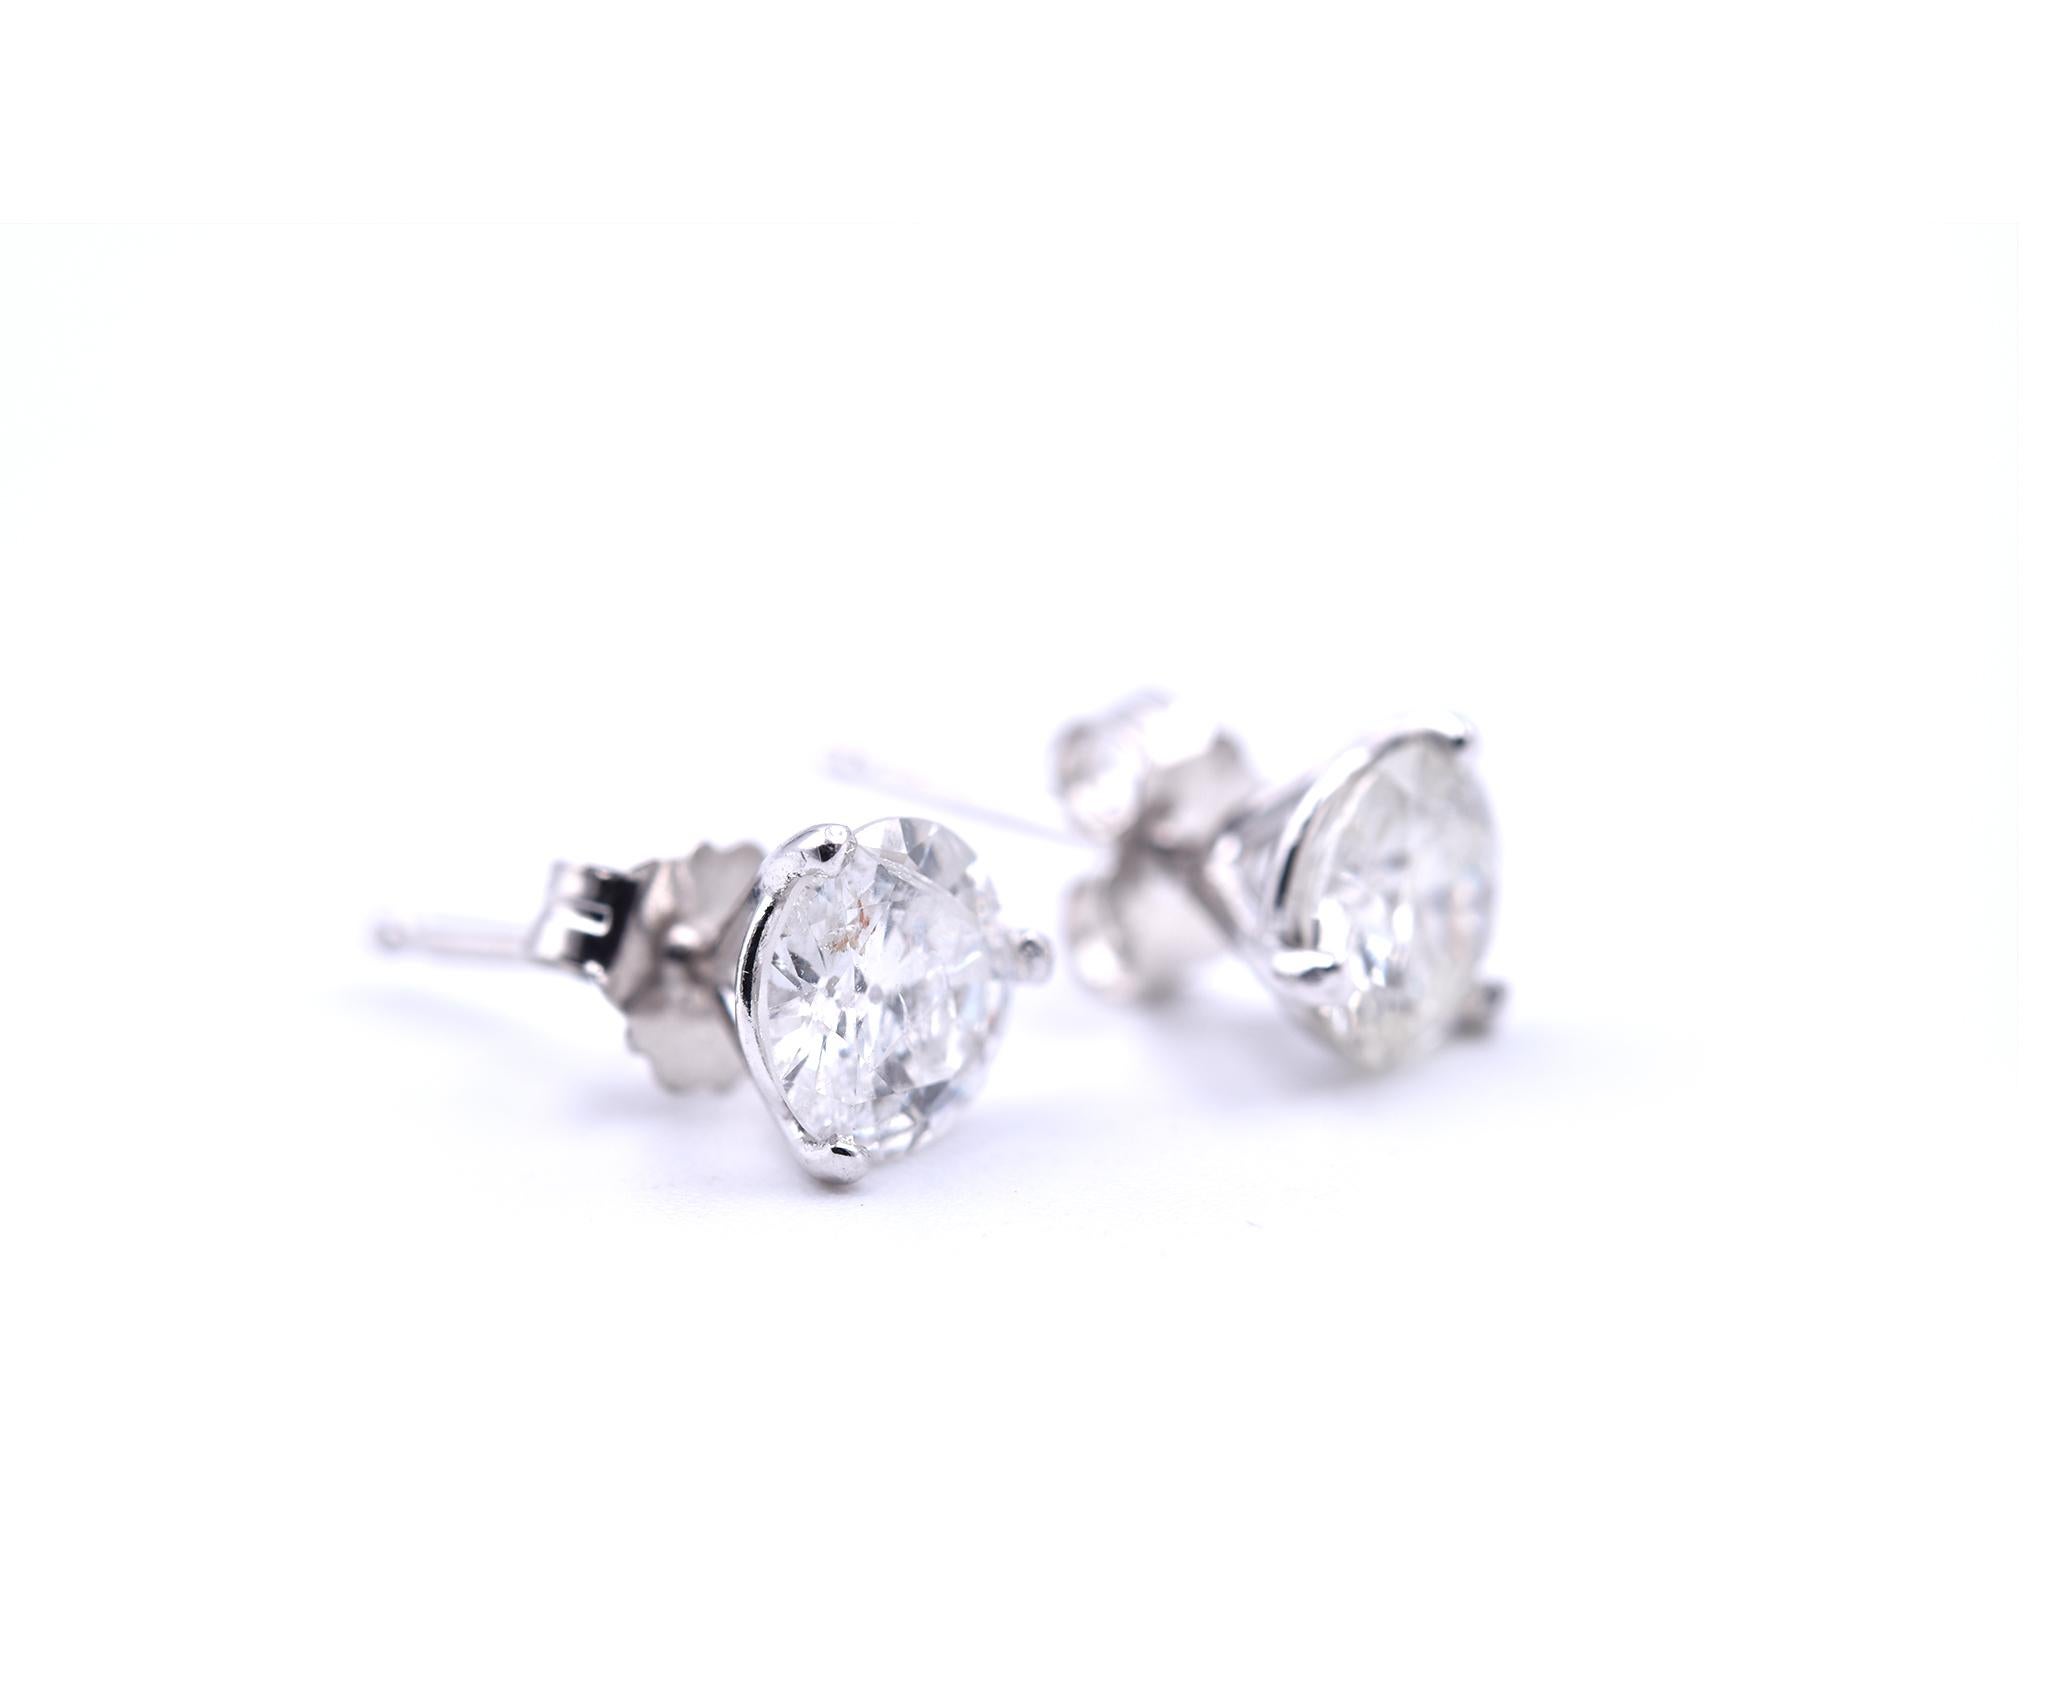 Designer: custom made
Material: 14k white gold
Diamond 1: 1 round brilliant cut = 0.74ct
Color: H-I
Clarity: SI1
Diamond 2: 1 round brilliant cut = 0.70ct
Color: G
Clarity: VS2
Dimensions: approximately 5.90mm in diameter
Fastenings: friction backs